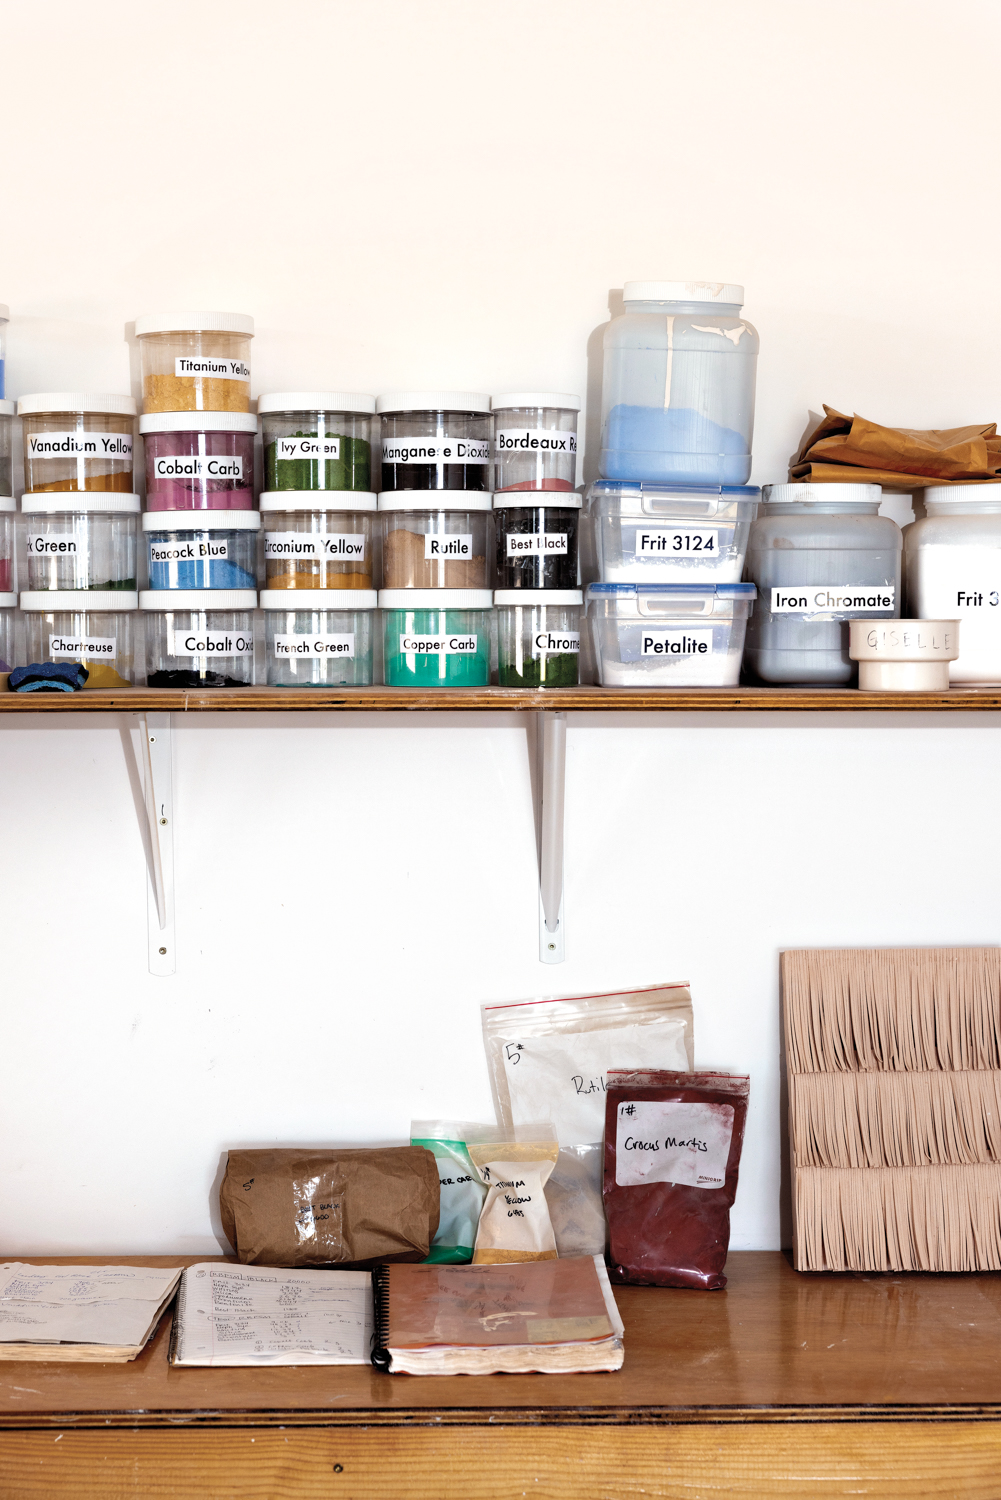 Pigments are stacked in Giselle Hicks' studio.